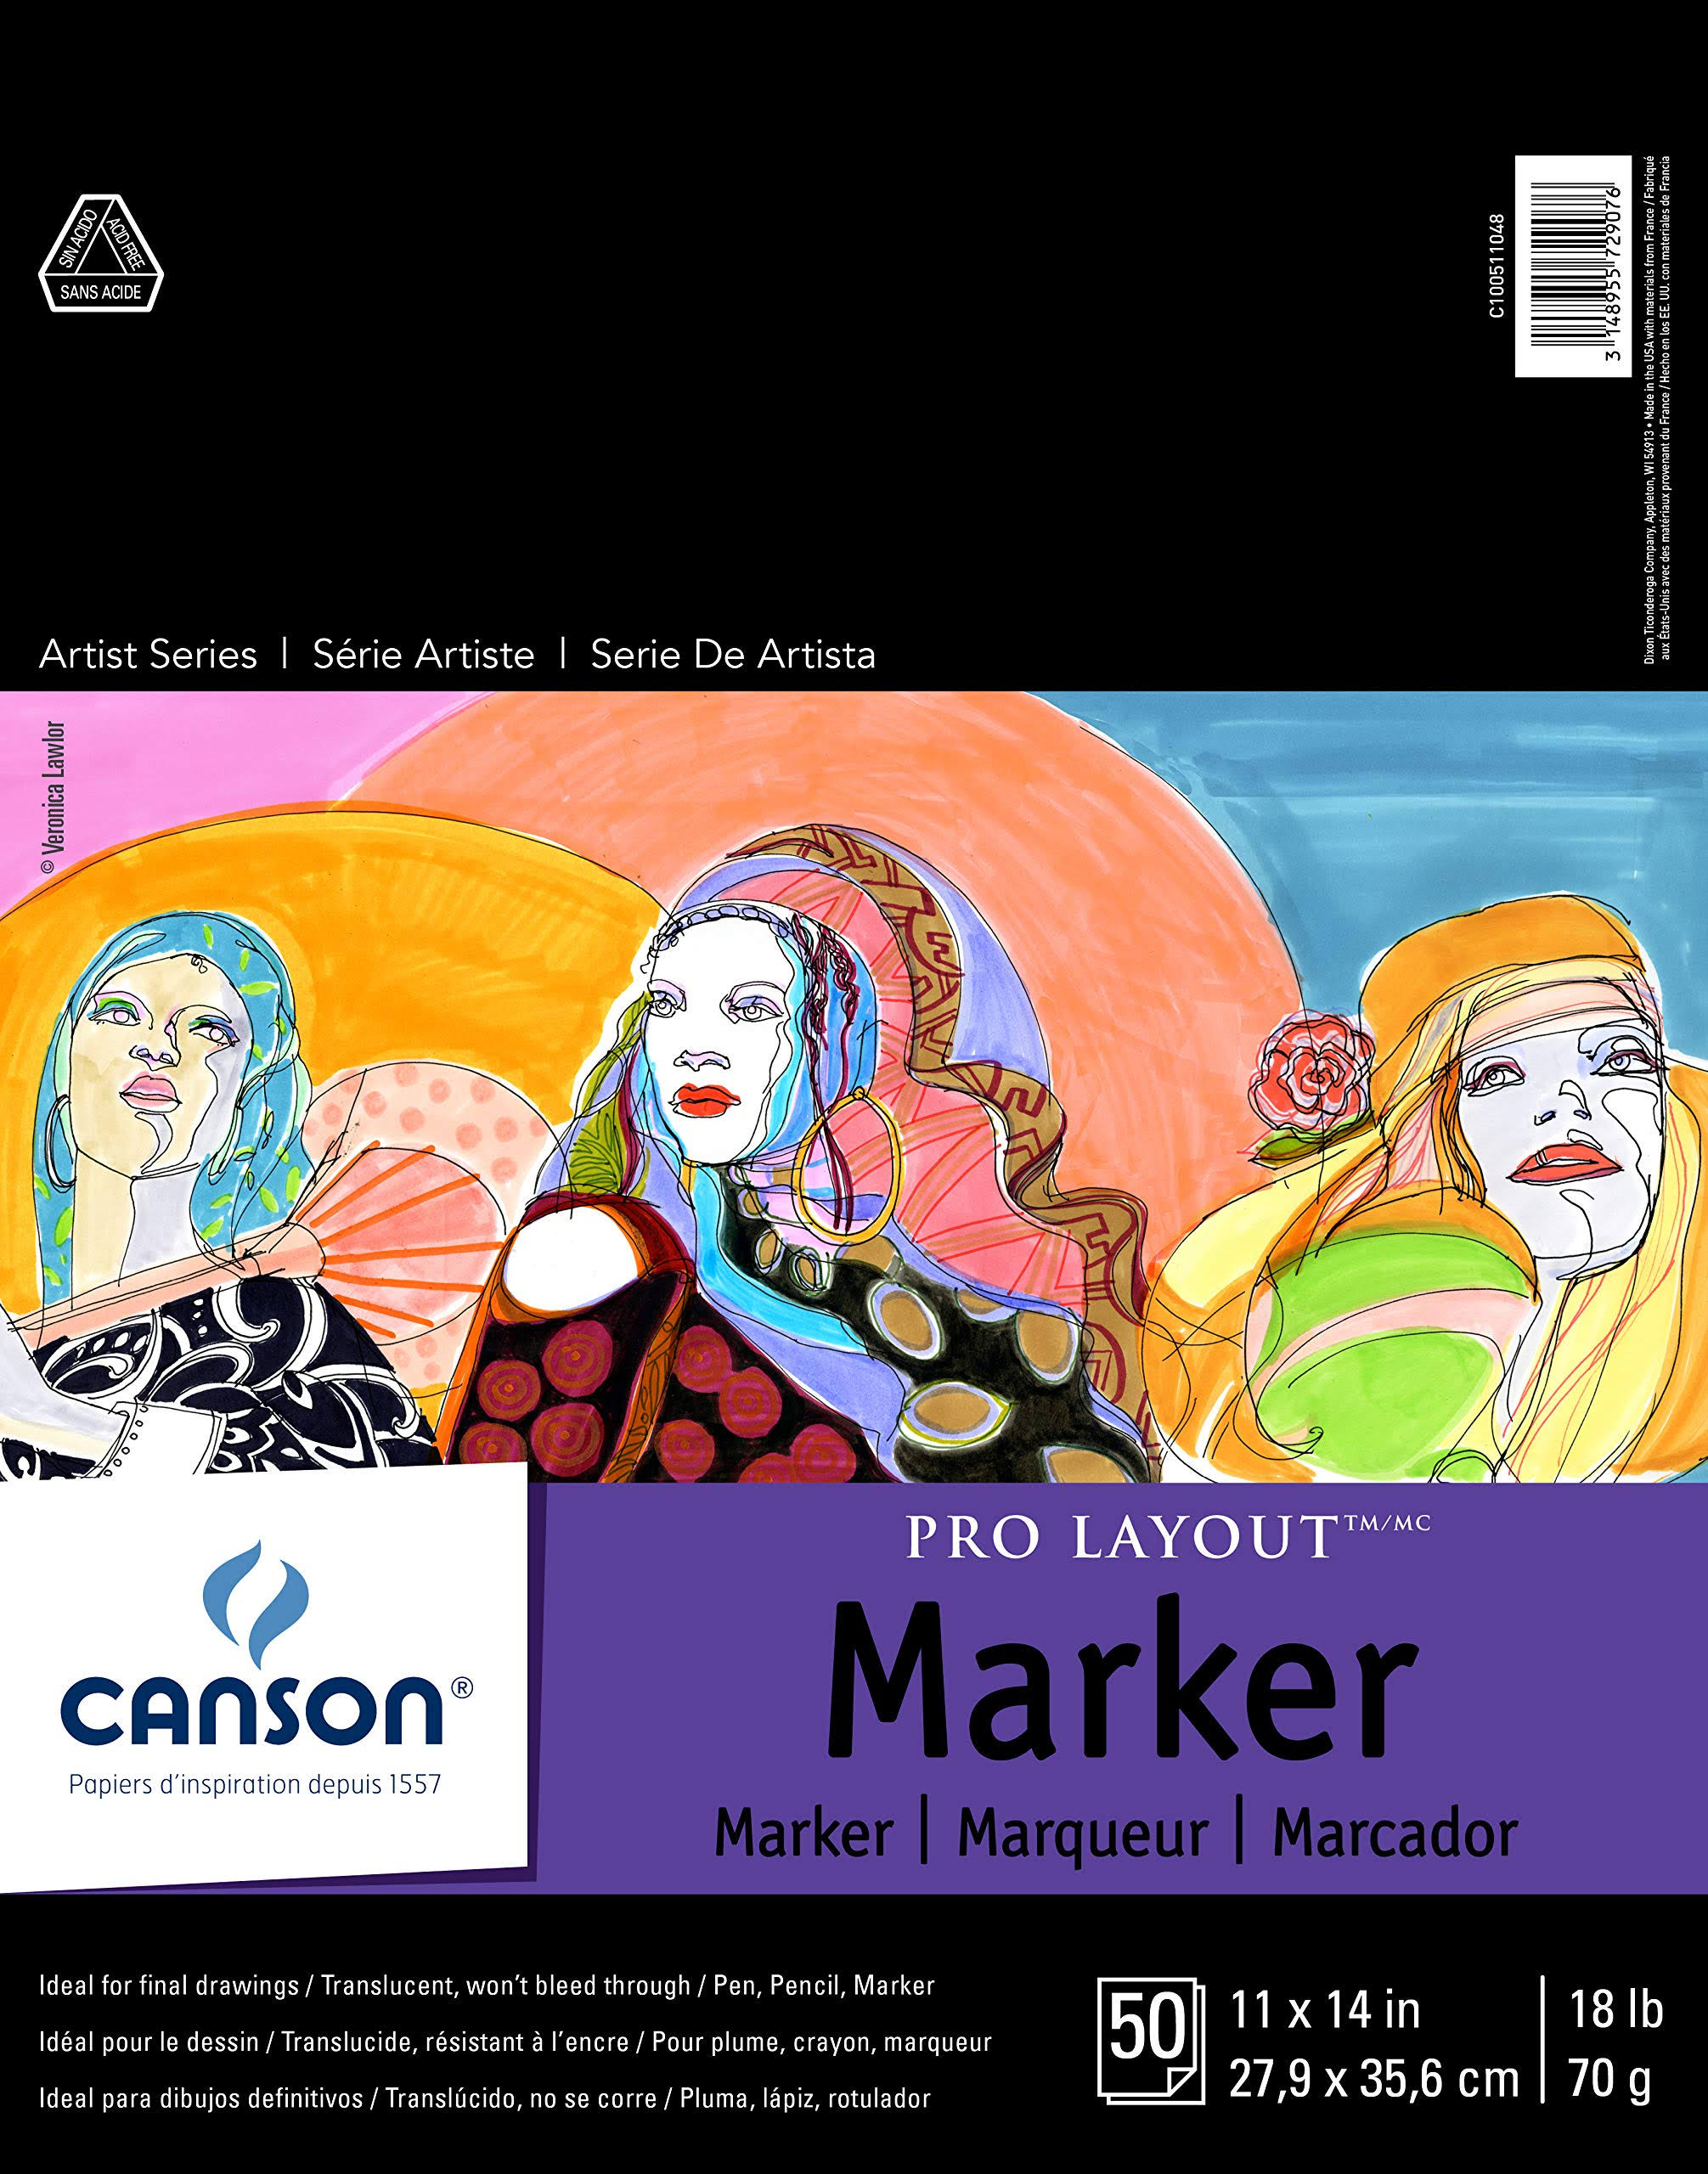 Canson Artist Series Pro Layout Marker Pad - 11" x 14", 50 Sheets